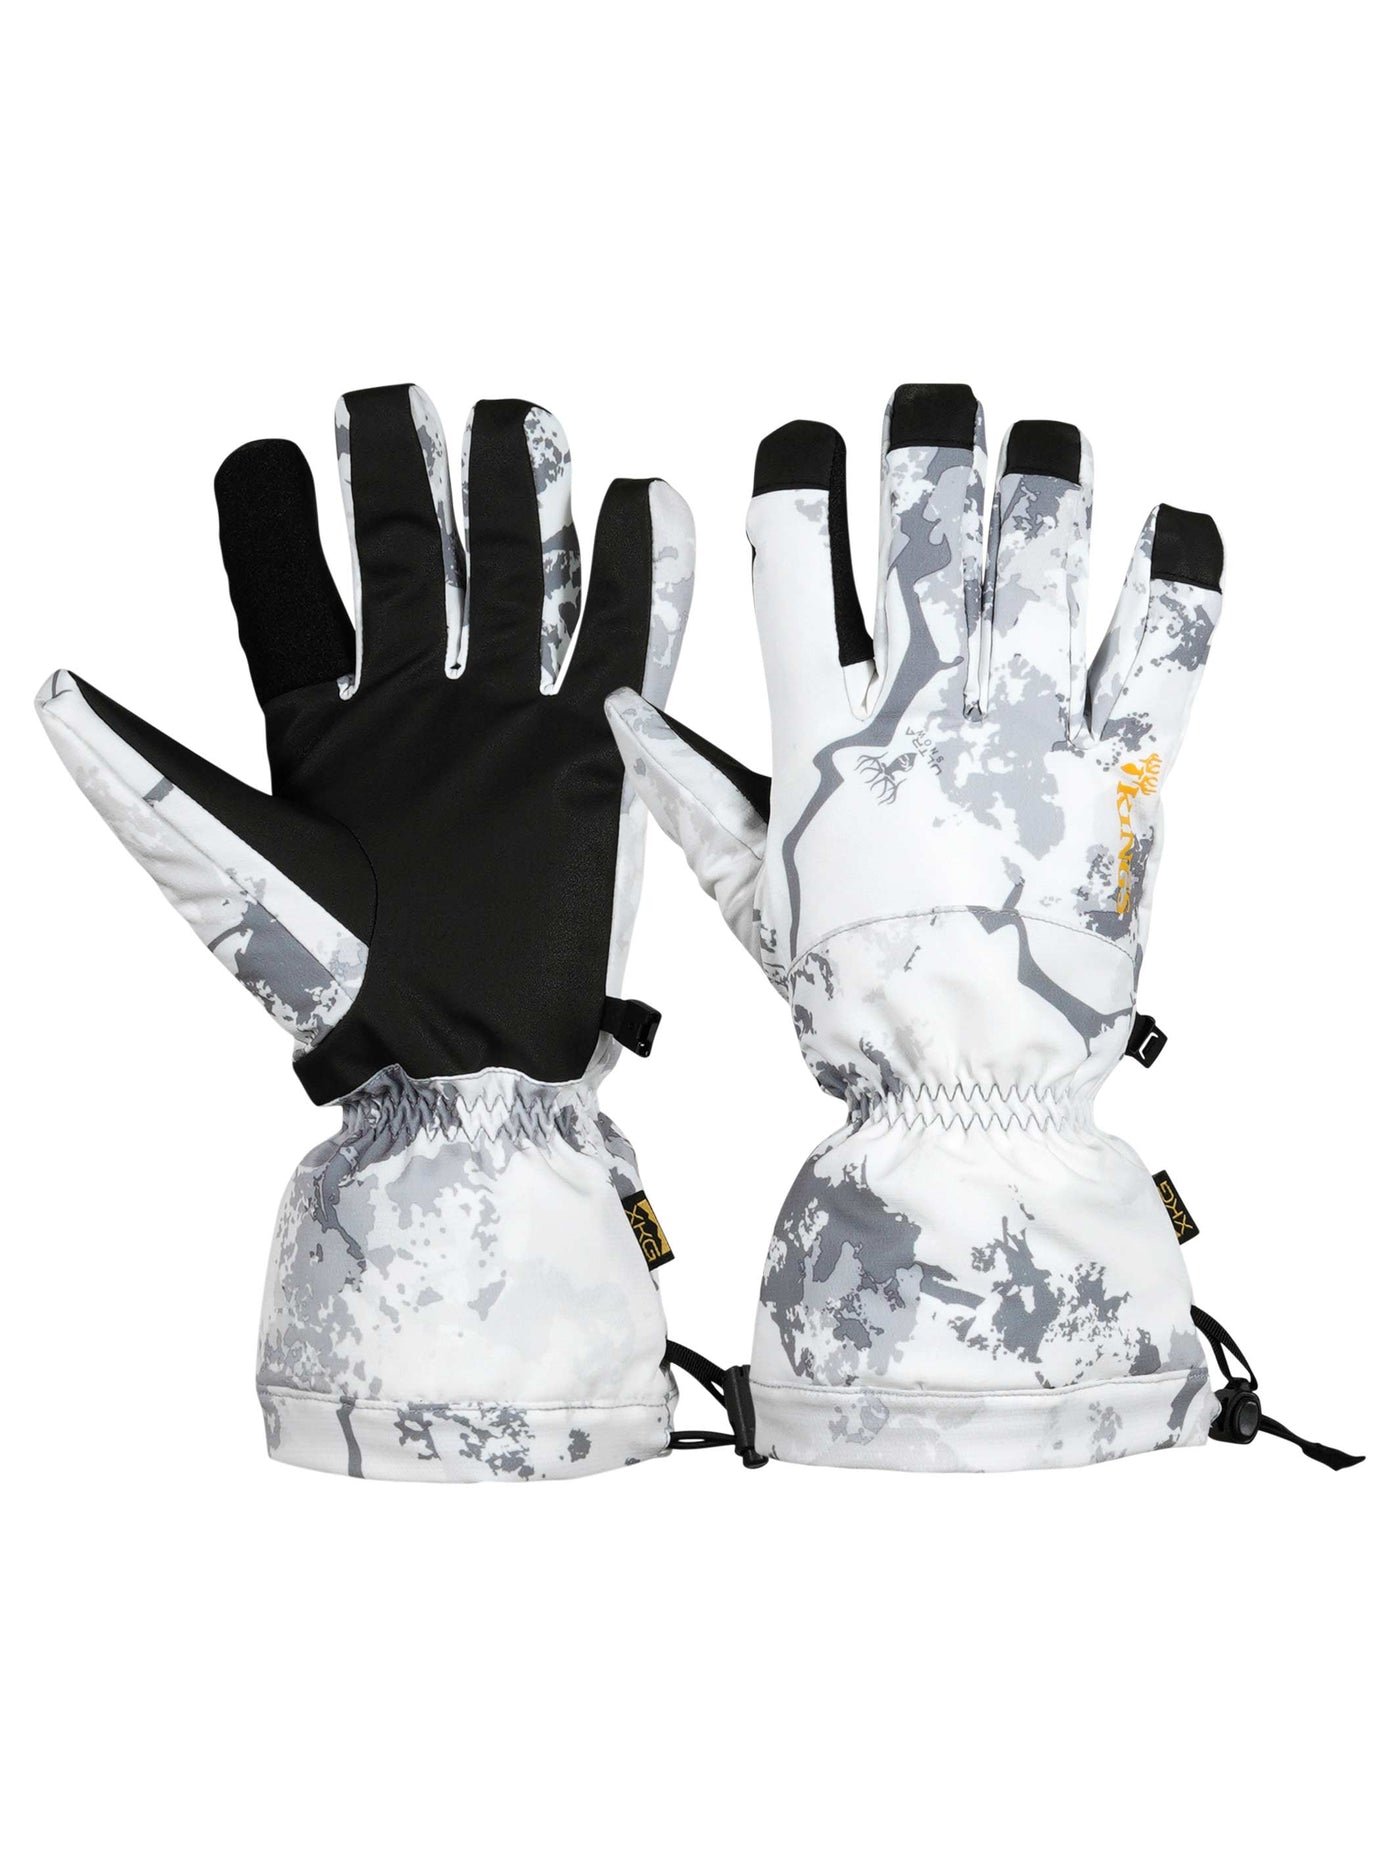 XKG Insulated Gloves in KC Ultra Snow | Corbotras lochi